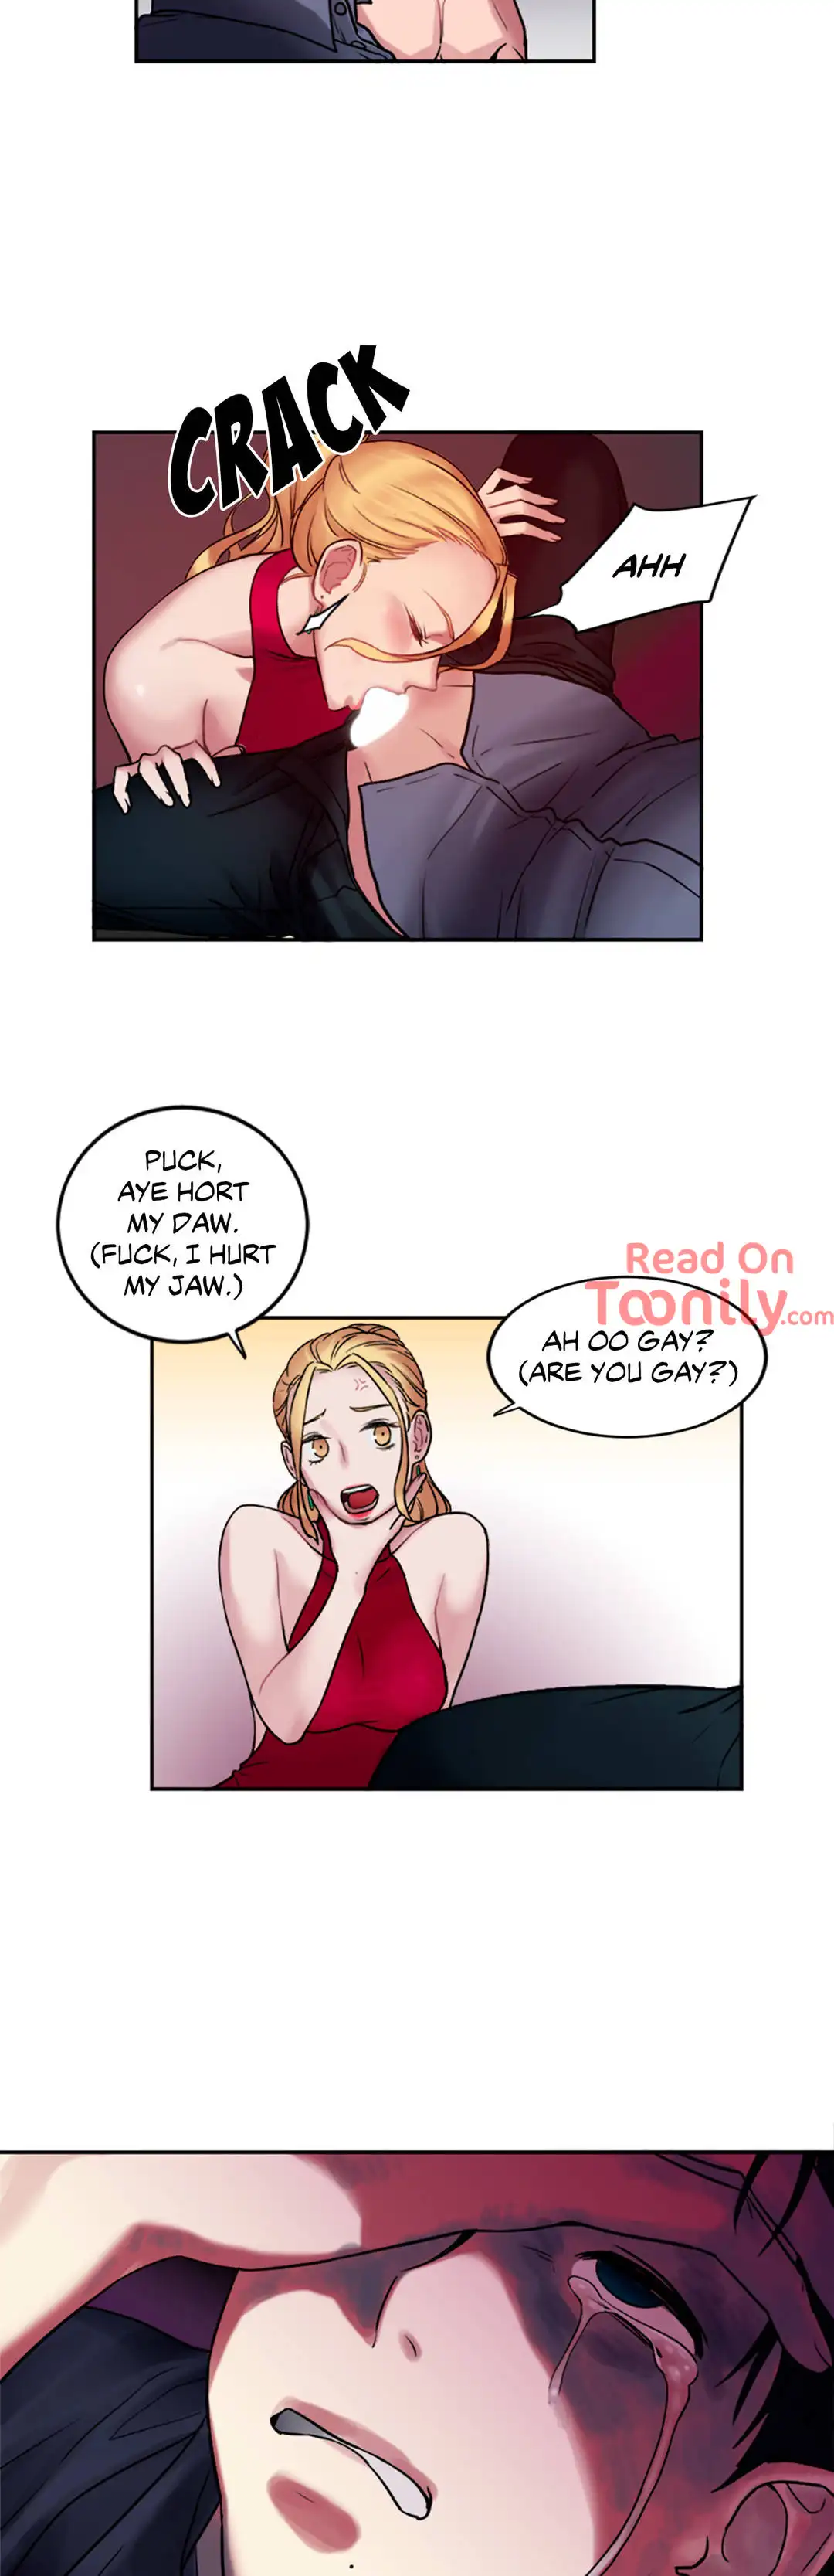 Tie Me Up - Chapter 1 Page 24